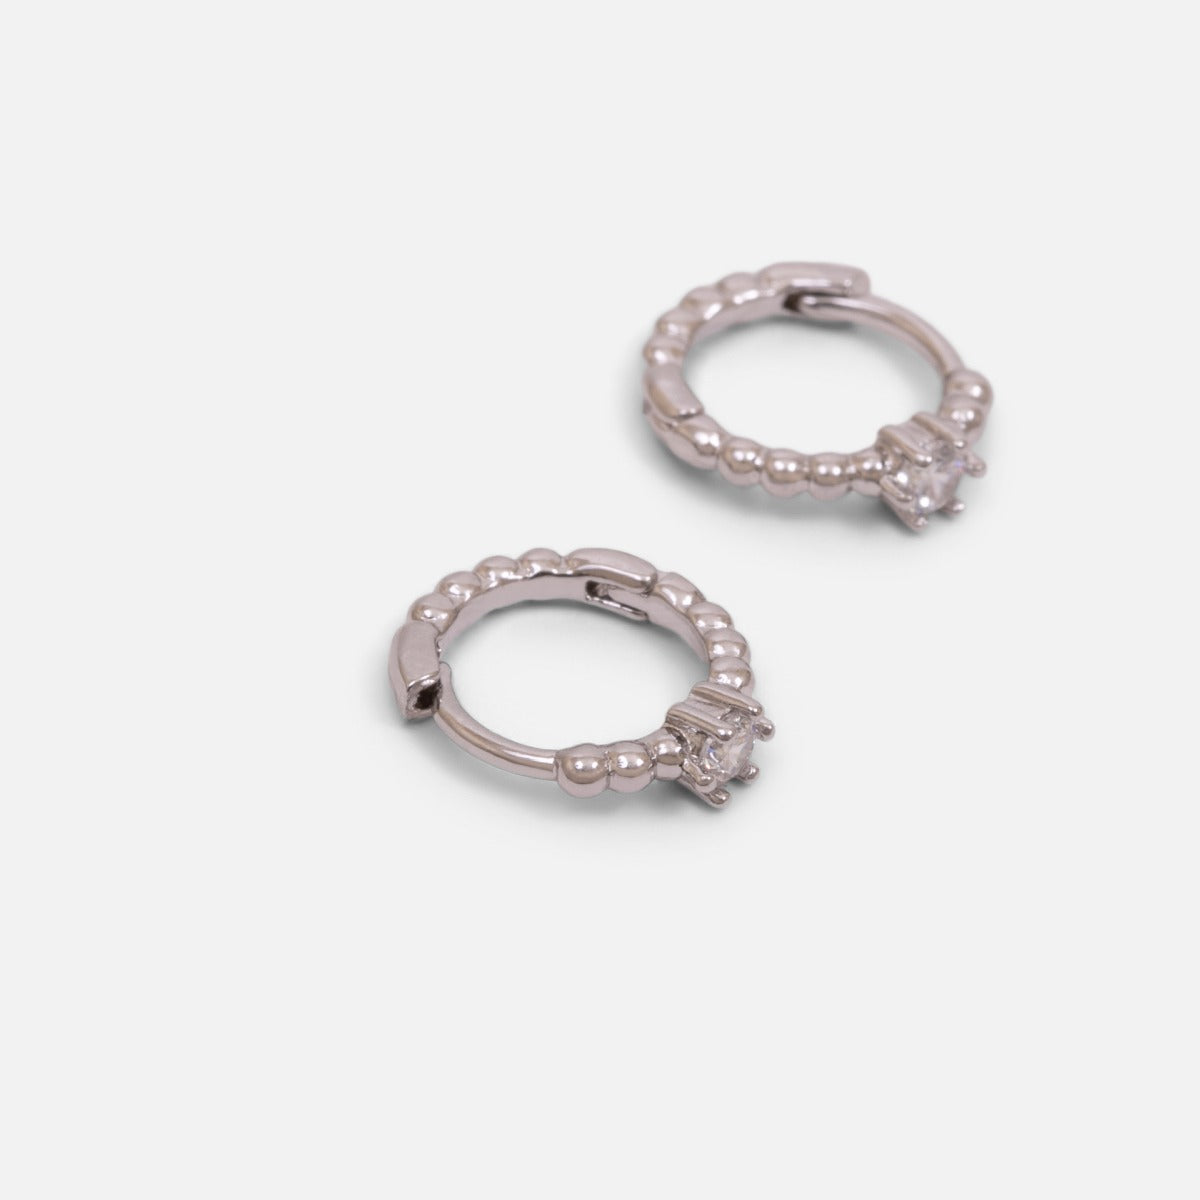 Set of three silvered fixed and hoop earrings